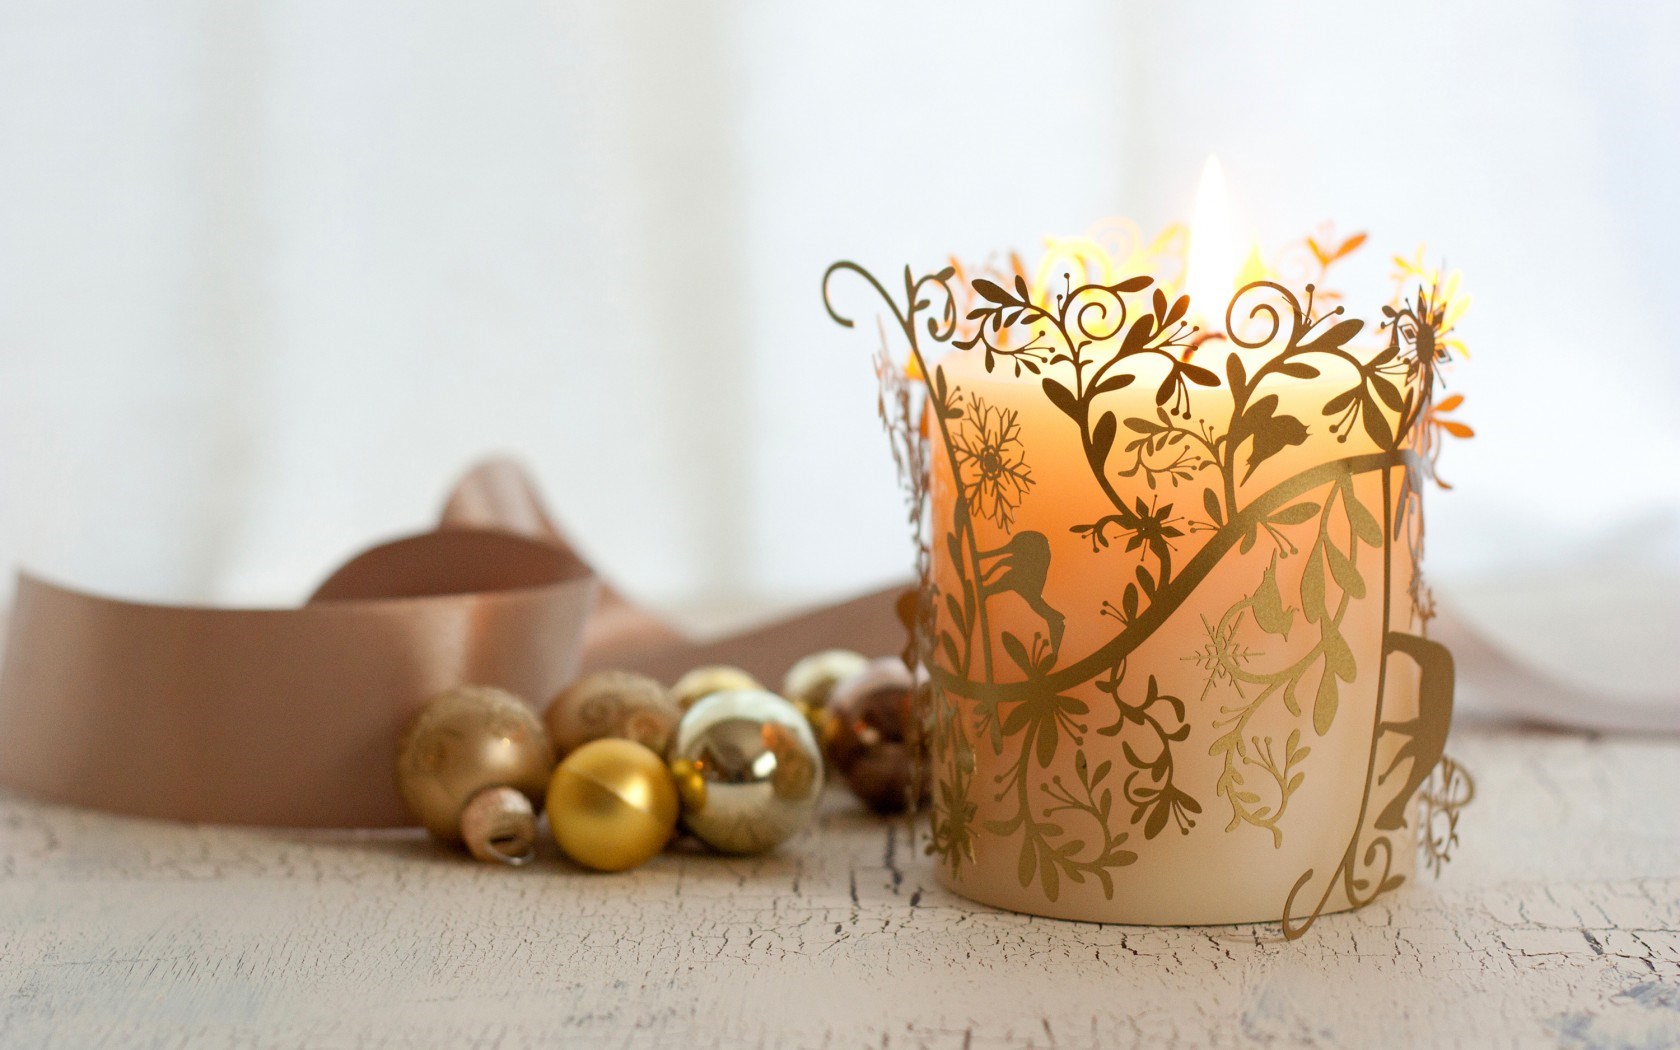 Candle Ribbon Beads Gold Christmas New Year Winter wallpaperx1050